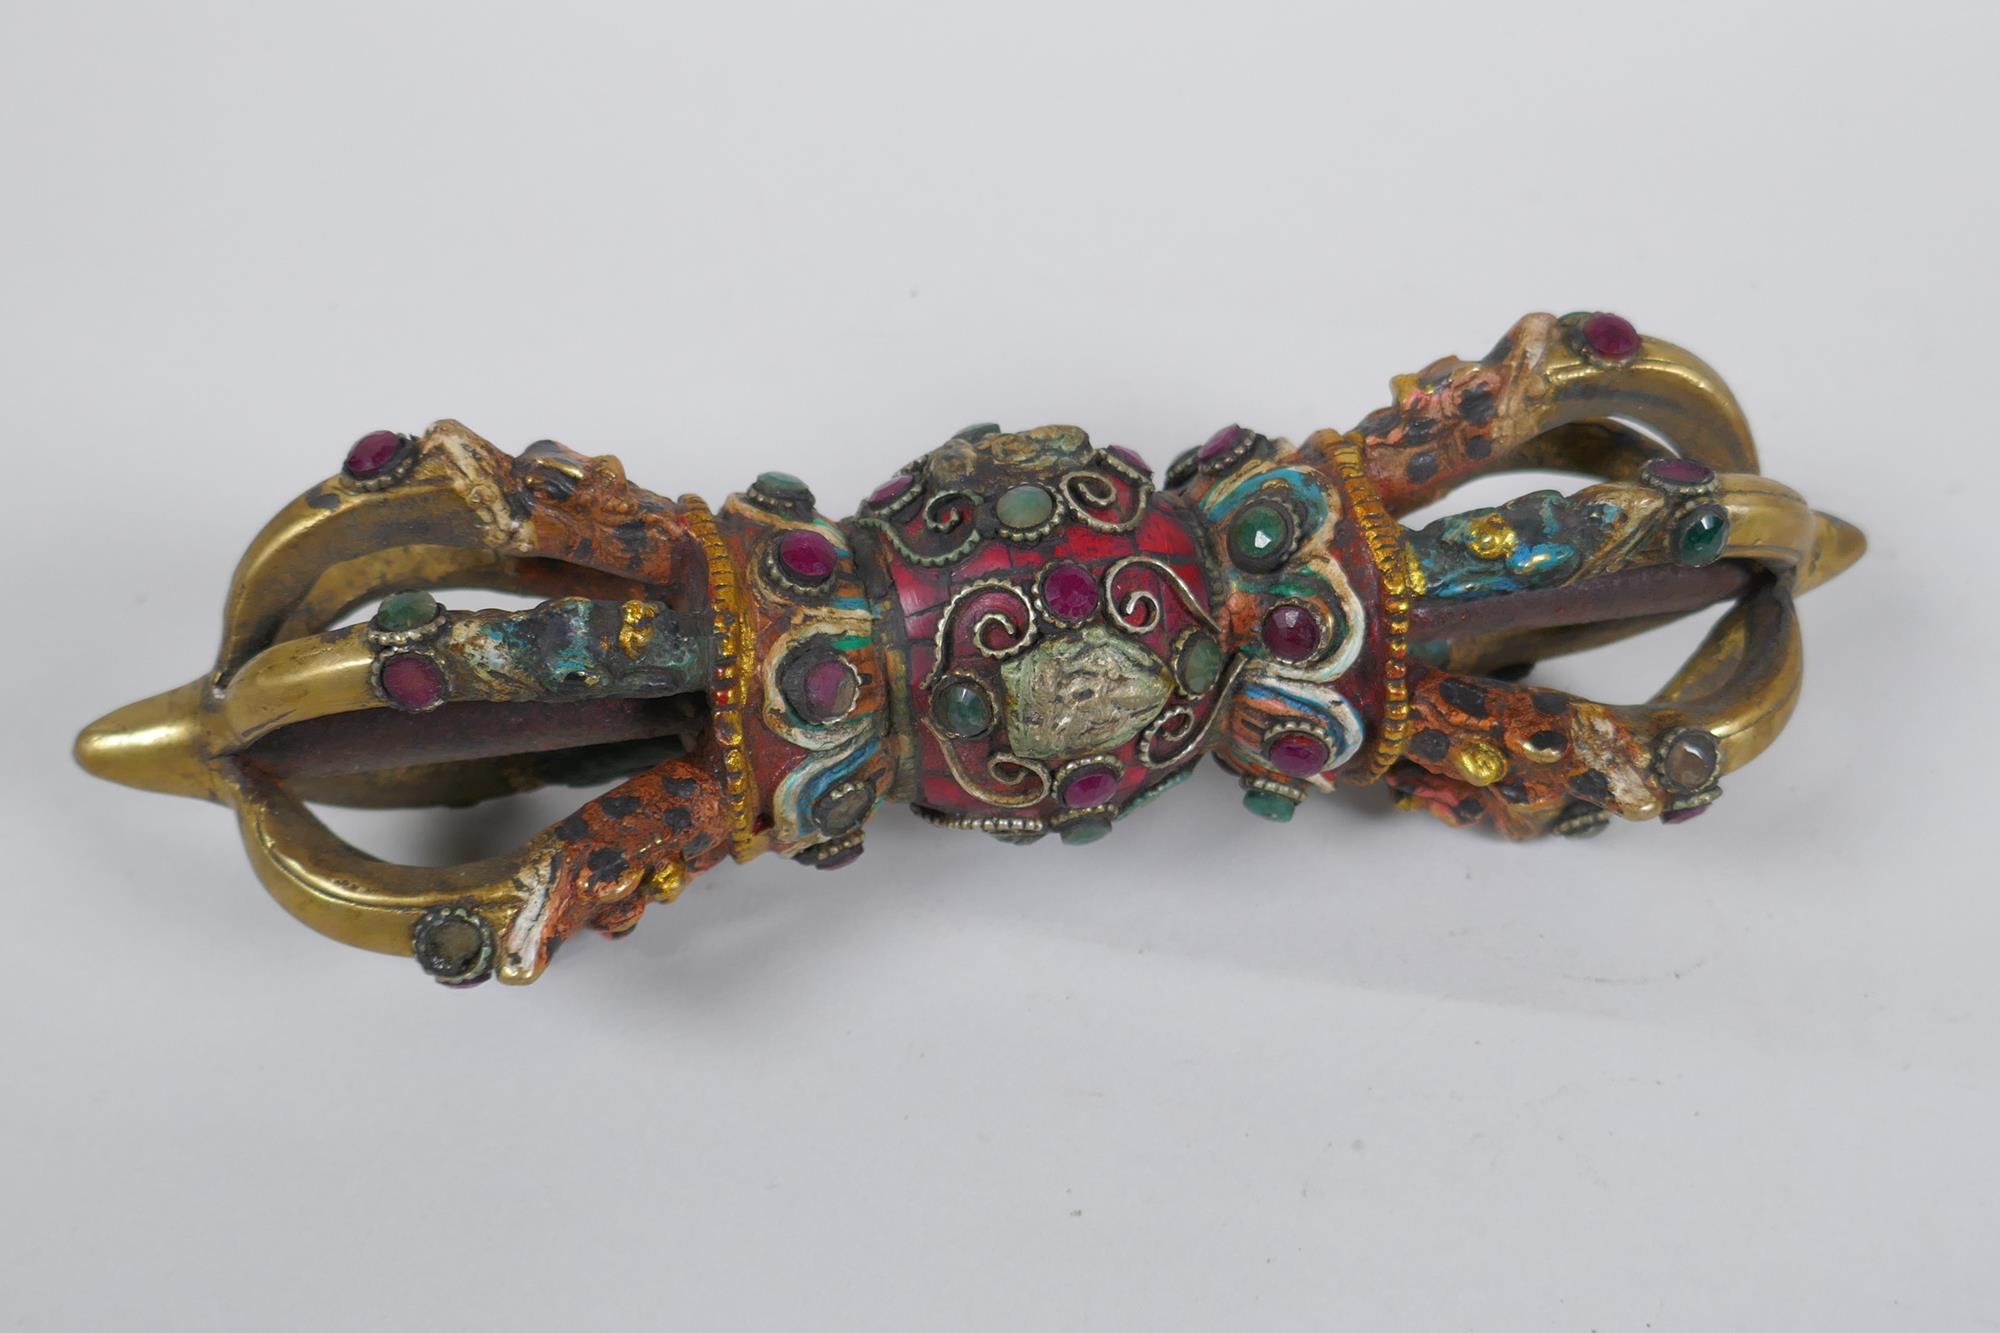 A Tibetan ceremonial bronze vajra with painted details and stone settings, 23cm long - Image 3 of 3